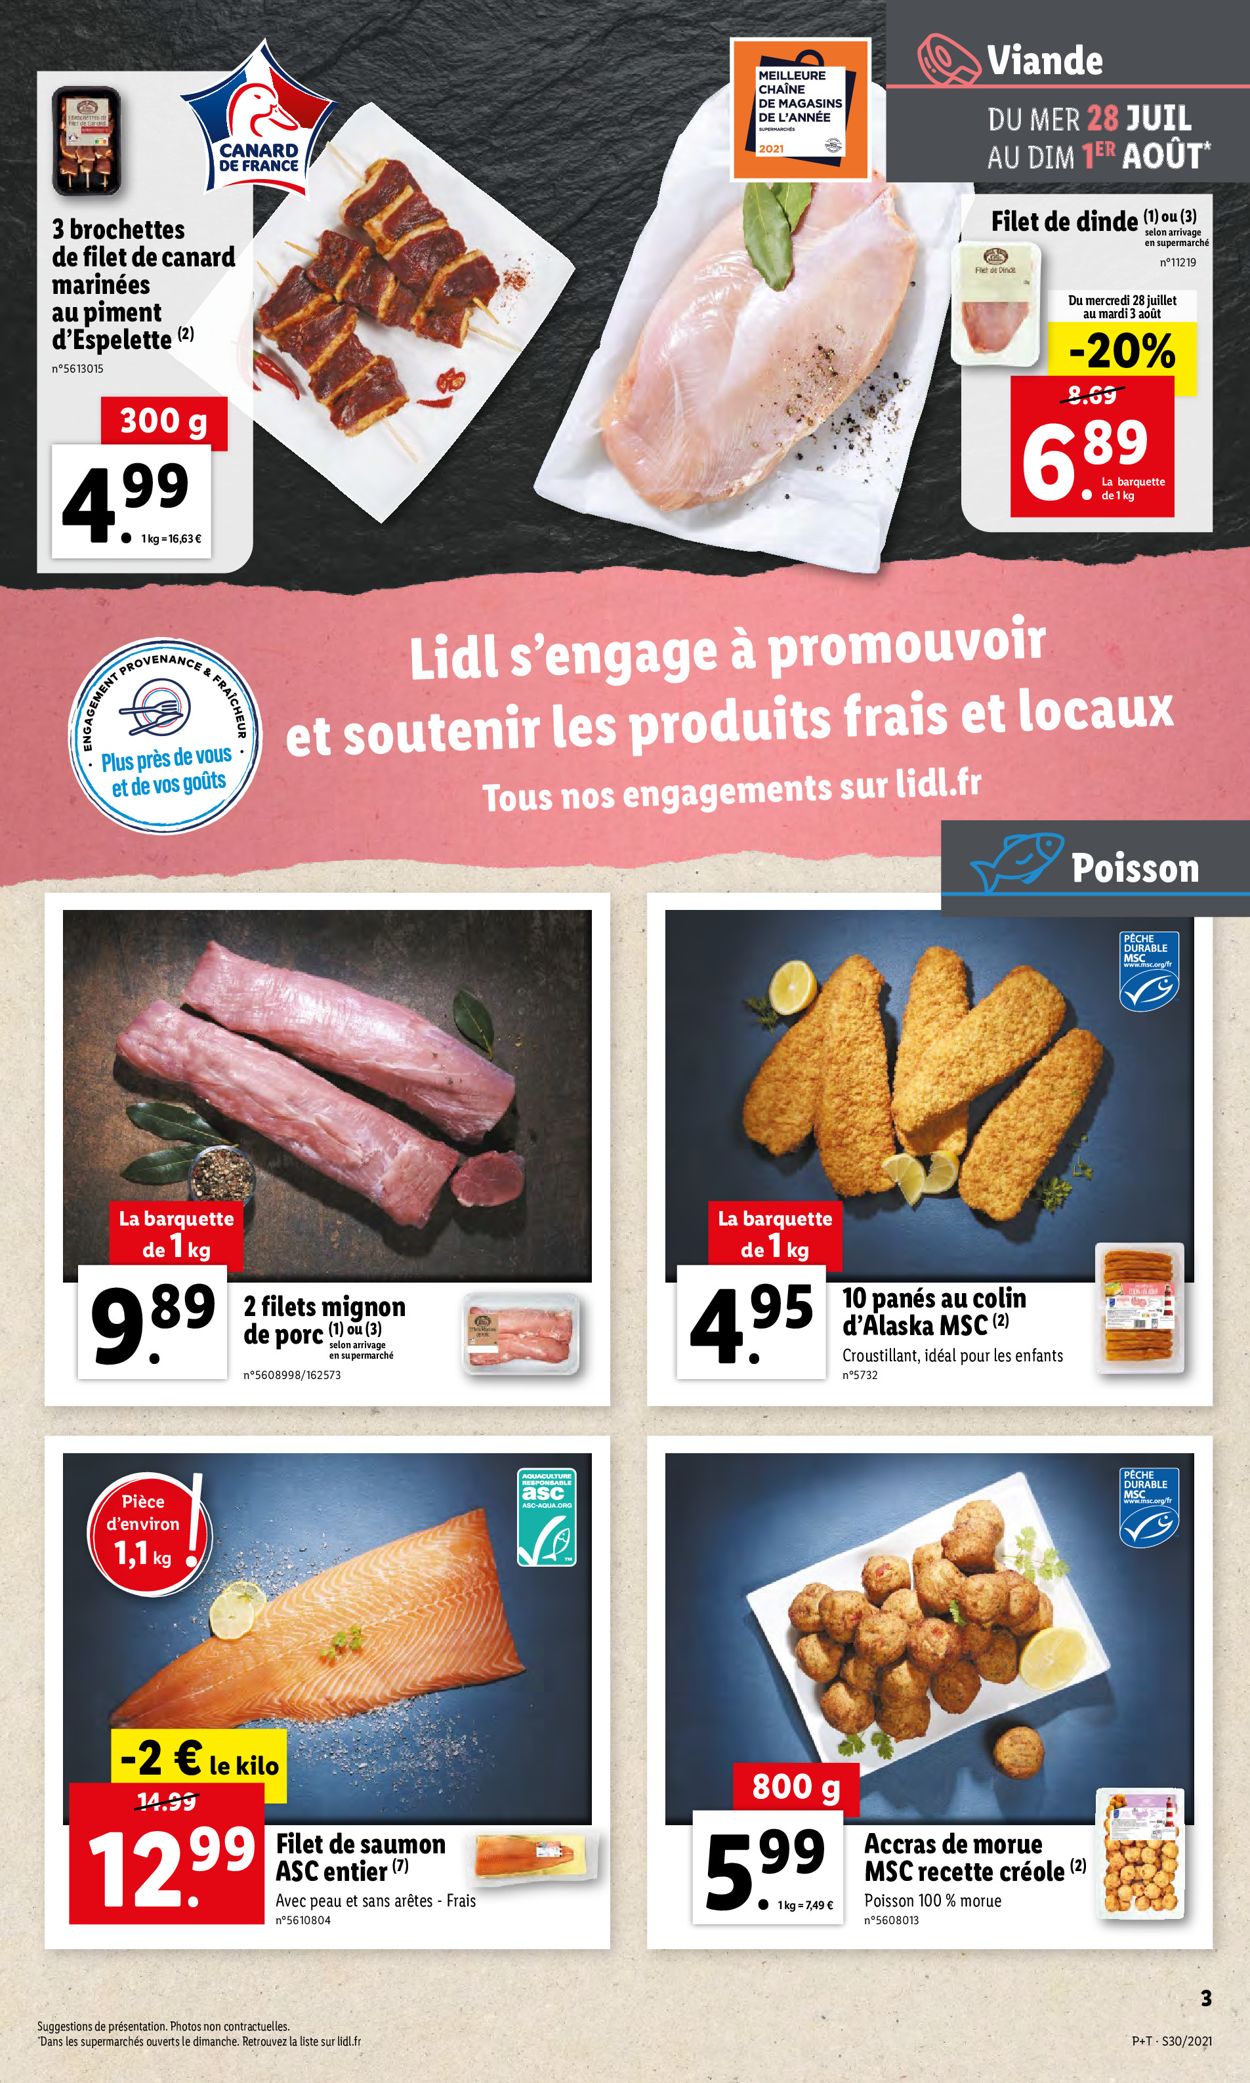 Lidl Catalogue - 28.07-03.08.2021 (Page 3)